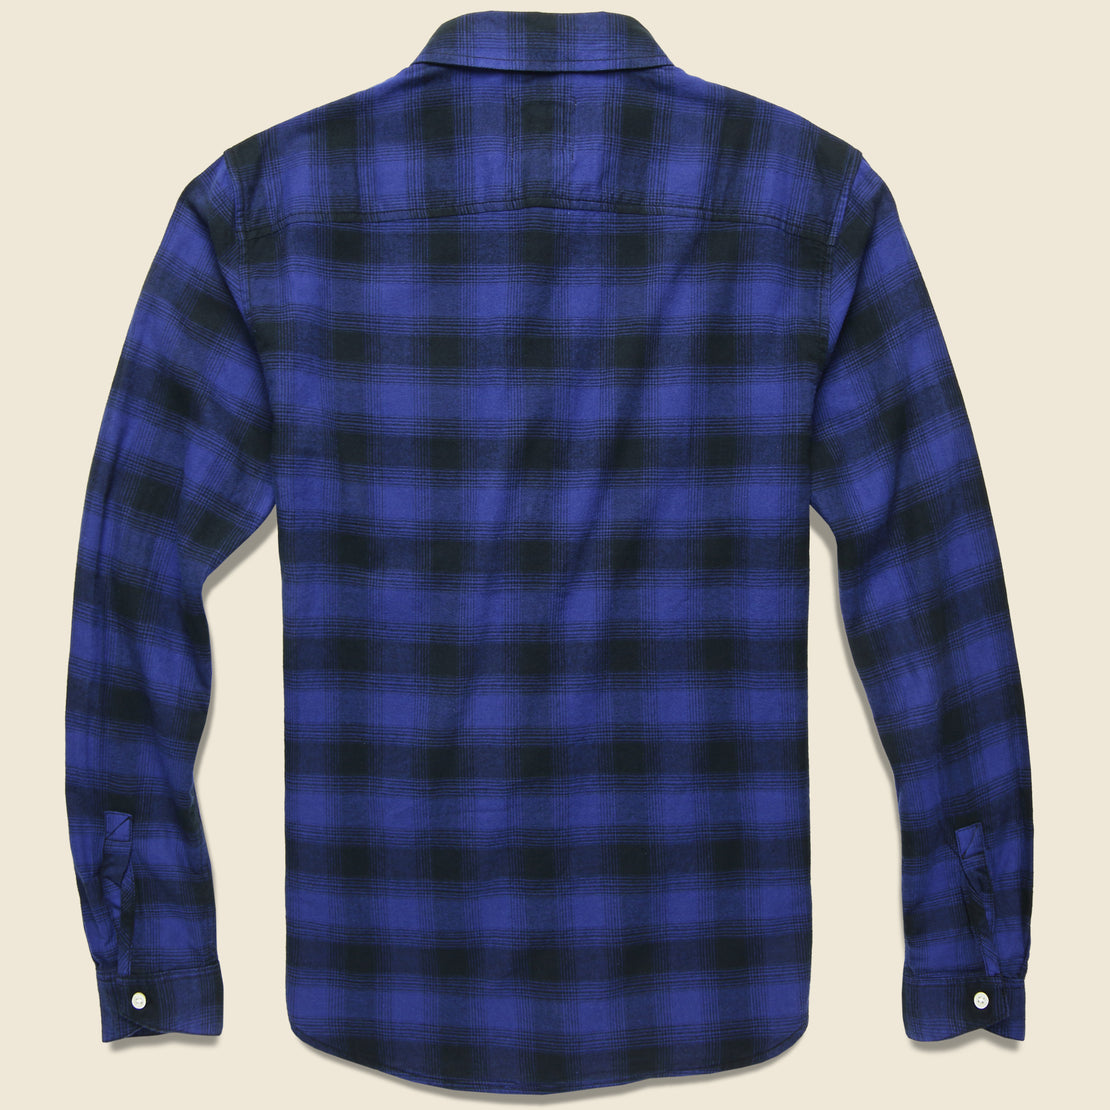 Lumberjack Flannel - Blue Jay - Life After Denim - STAG Provisions - Tops - L/S Woven - Plaid